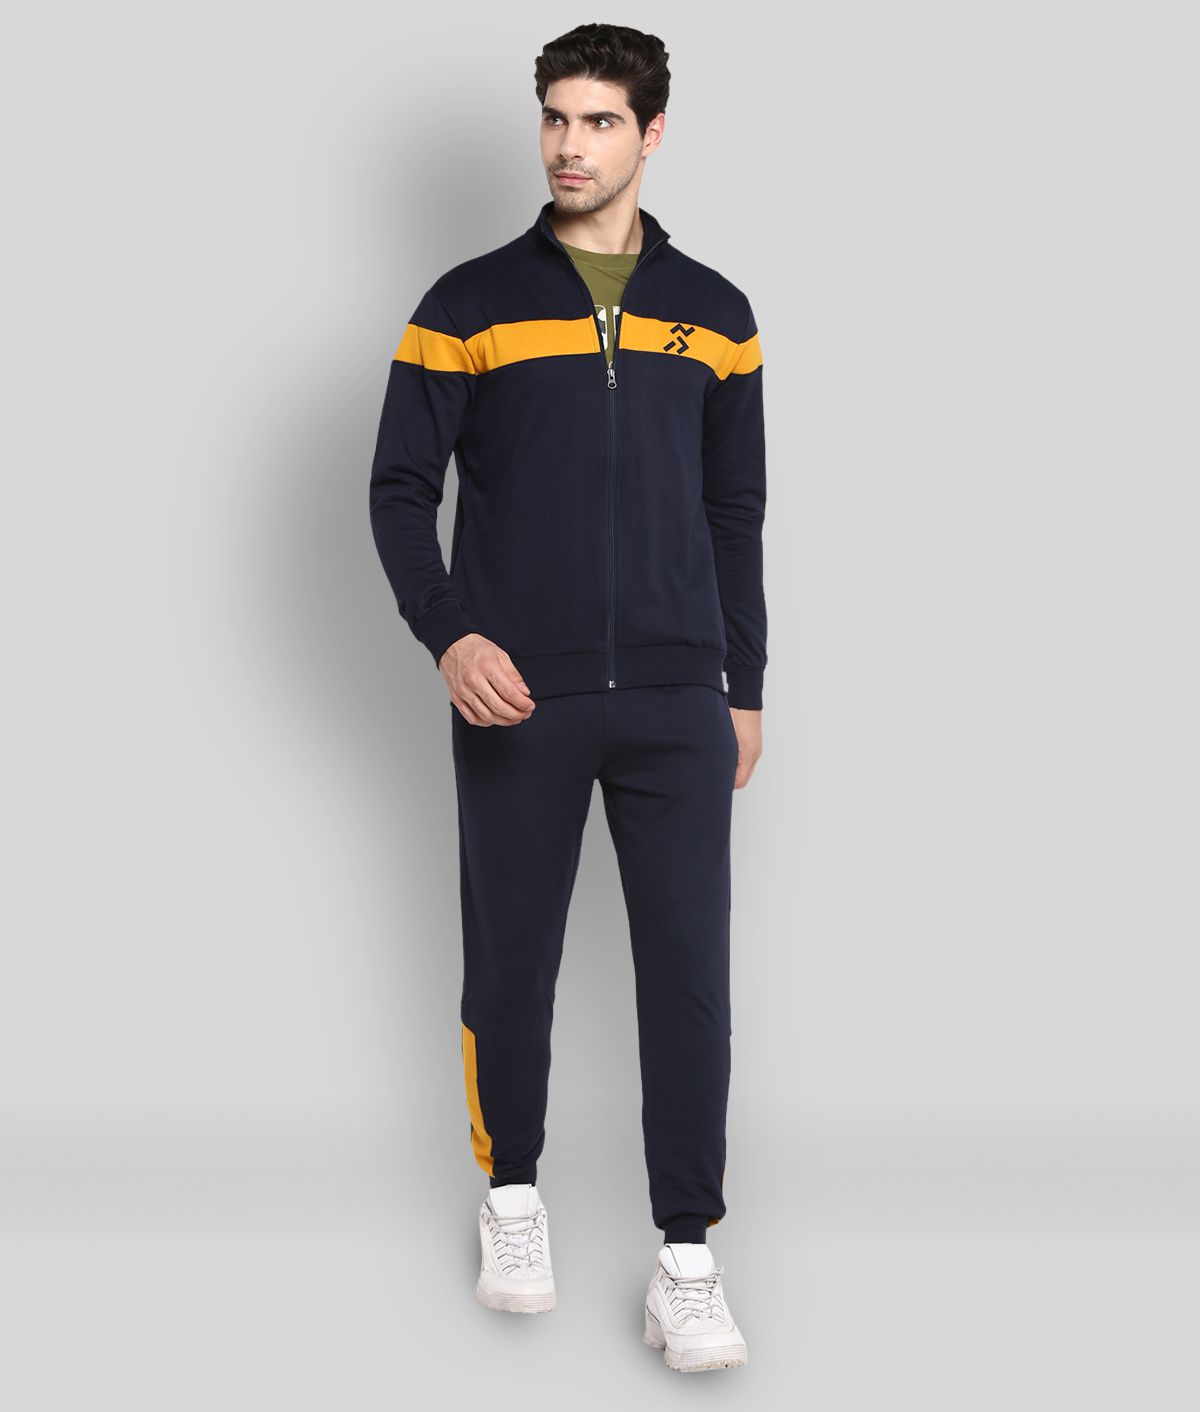 OFF LIMITS - Navy Blue Polyester Regular Fit Colorblock Men's Sports Tracksuit ( Pack of 1 )